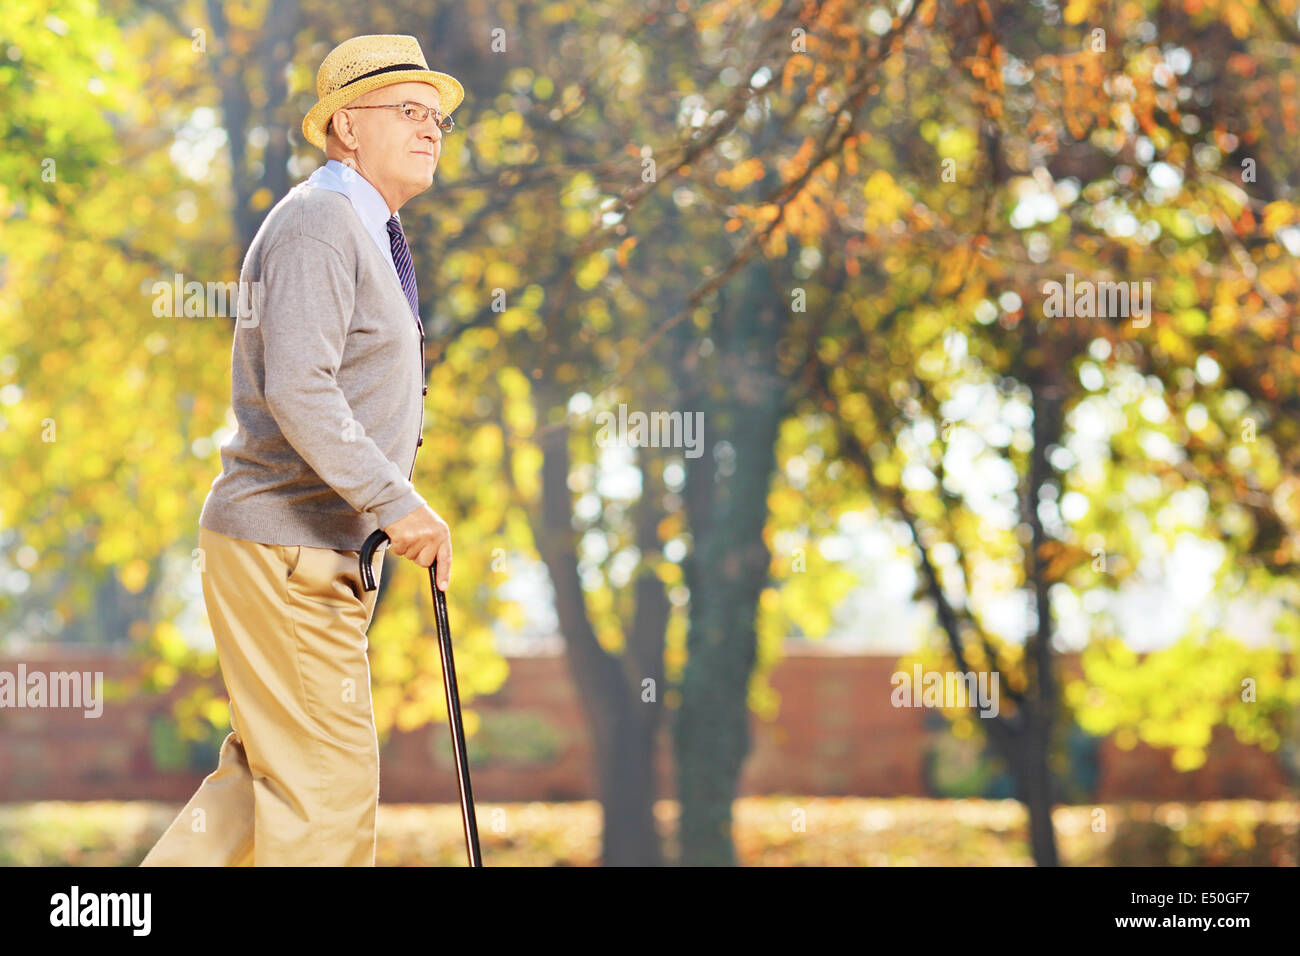 Senior gentleman walking with a cane in a park Stock Photo